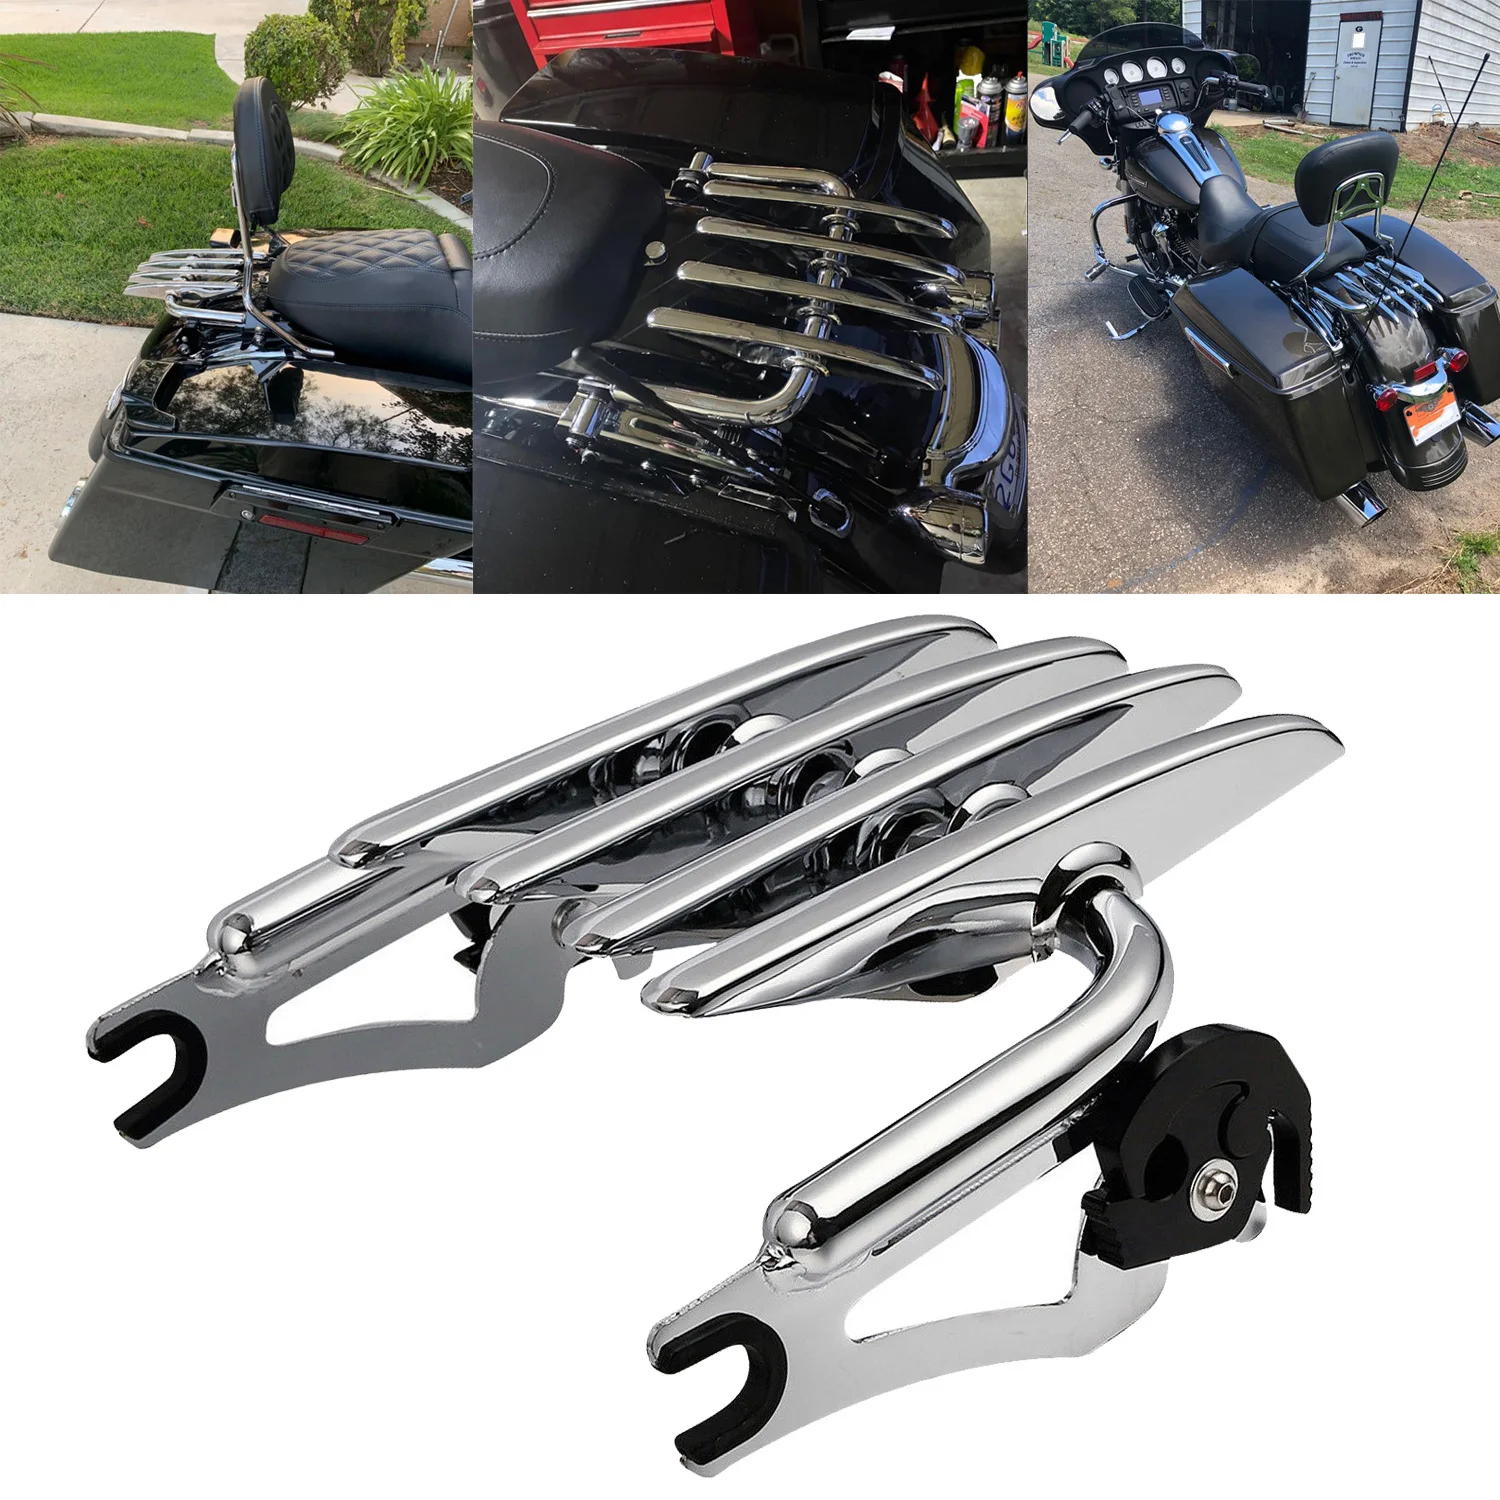 Chrome Detachable Two-Up Stealth Mounting Luggage Rack For Harley Touring Street Electra Glide Road King FLHT FLHX 2009-2023 front brake master cylinder covers for harley touring road king ultra tri street glide electra street v rod night rod flhx fltr